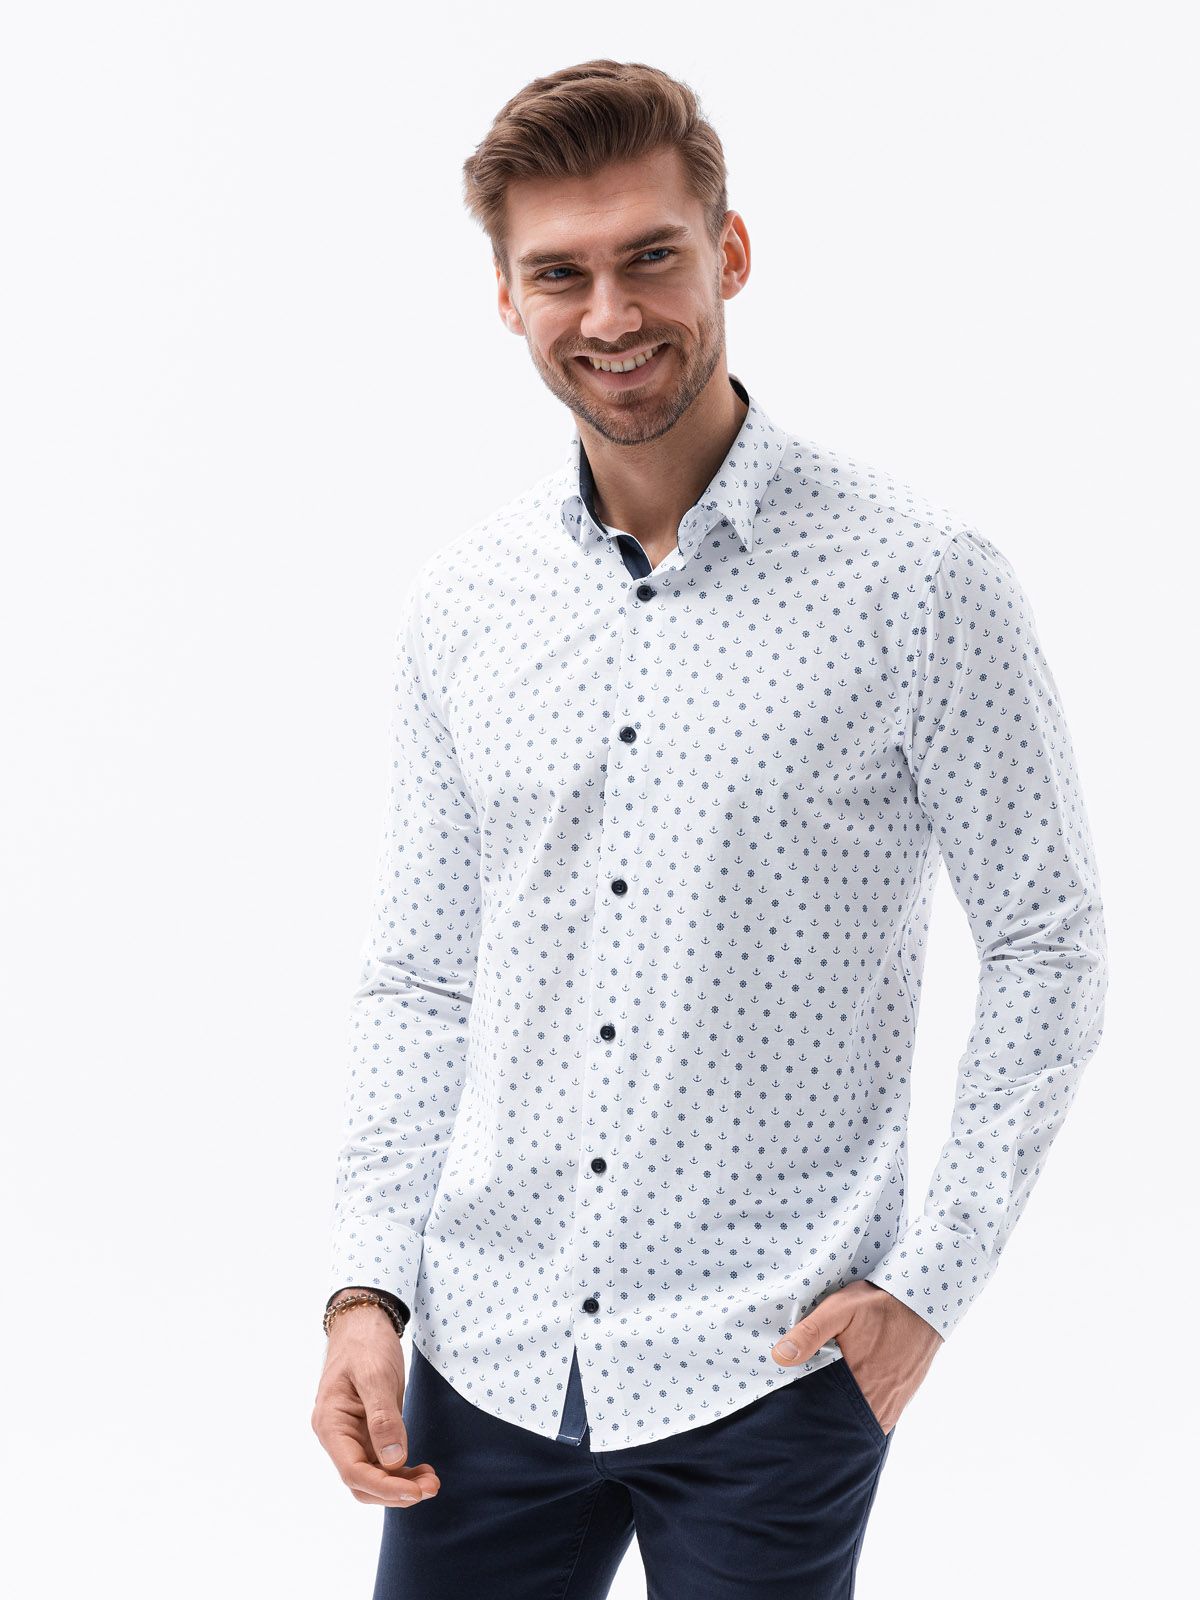 Men's shirt with long sleeves K314 - white | MODONE wholesale ...